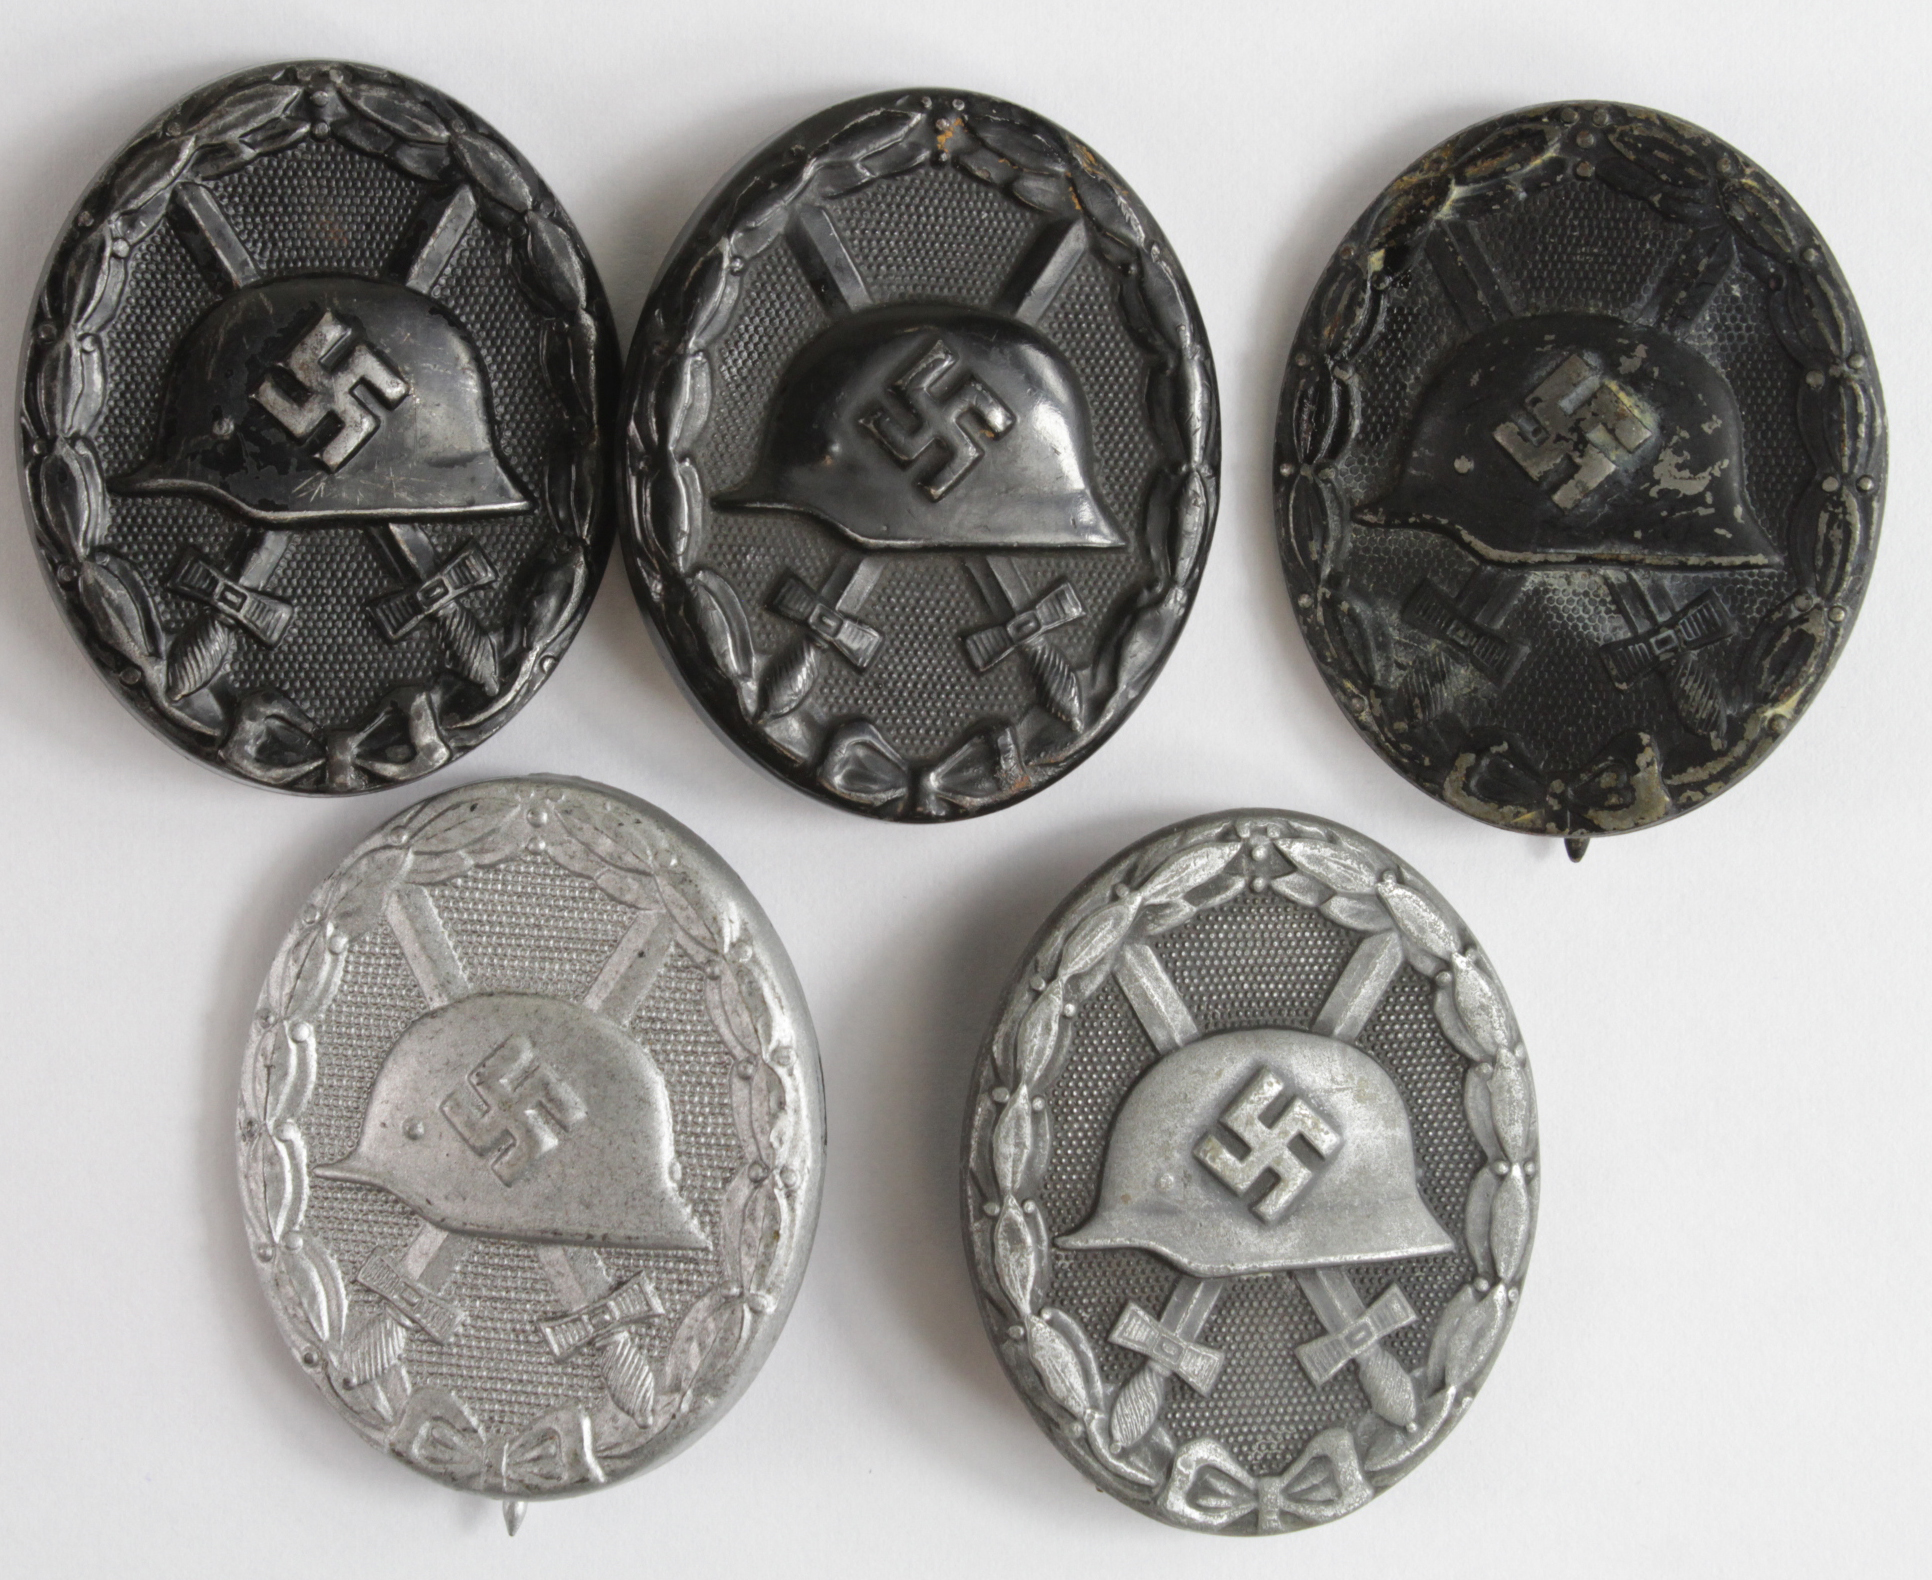 German WW2 Wounds Badges - Silver maker marked '4' to pin, Silver maker marked '81', Black maker